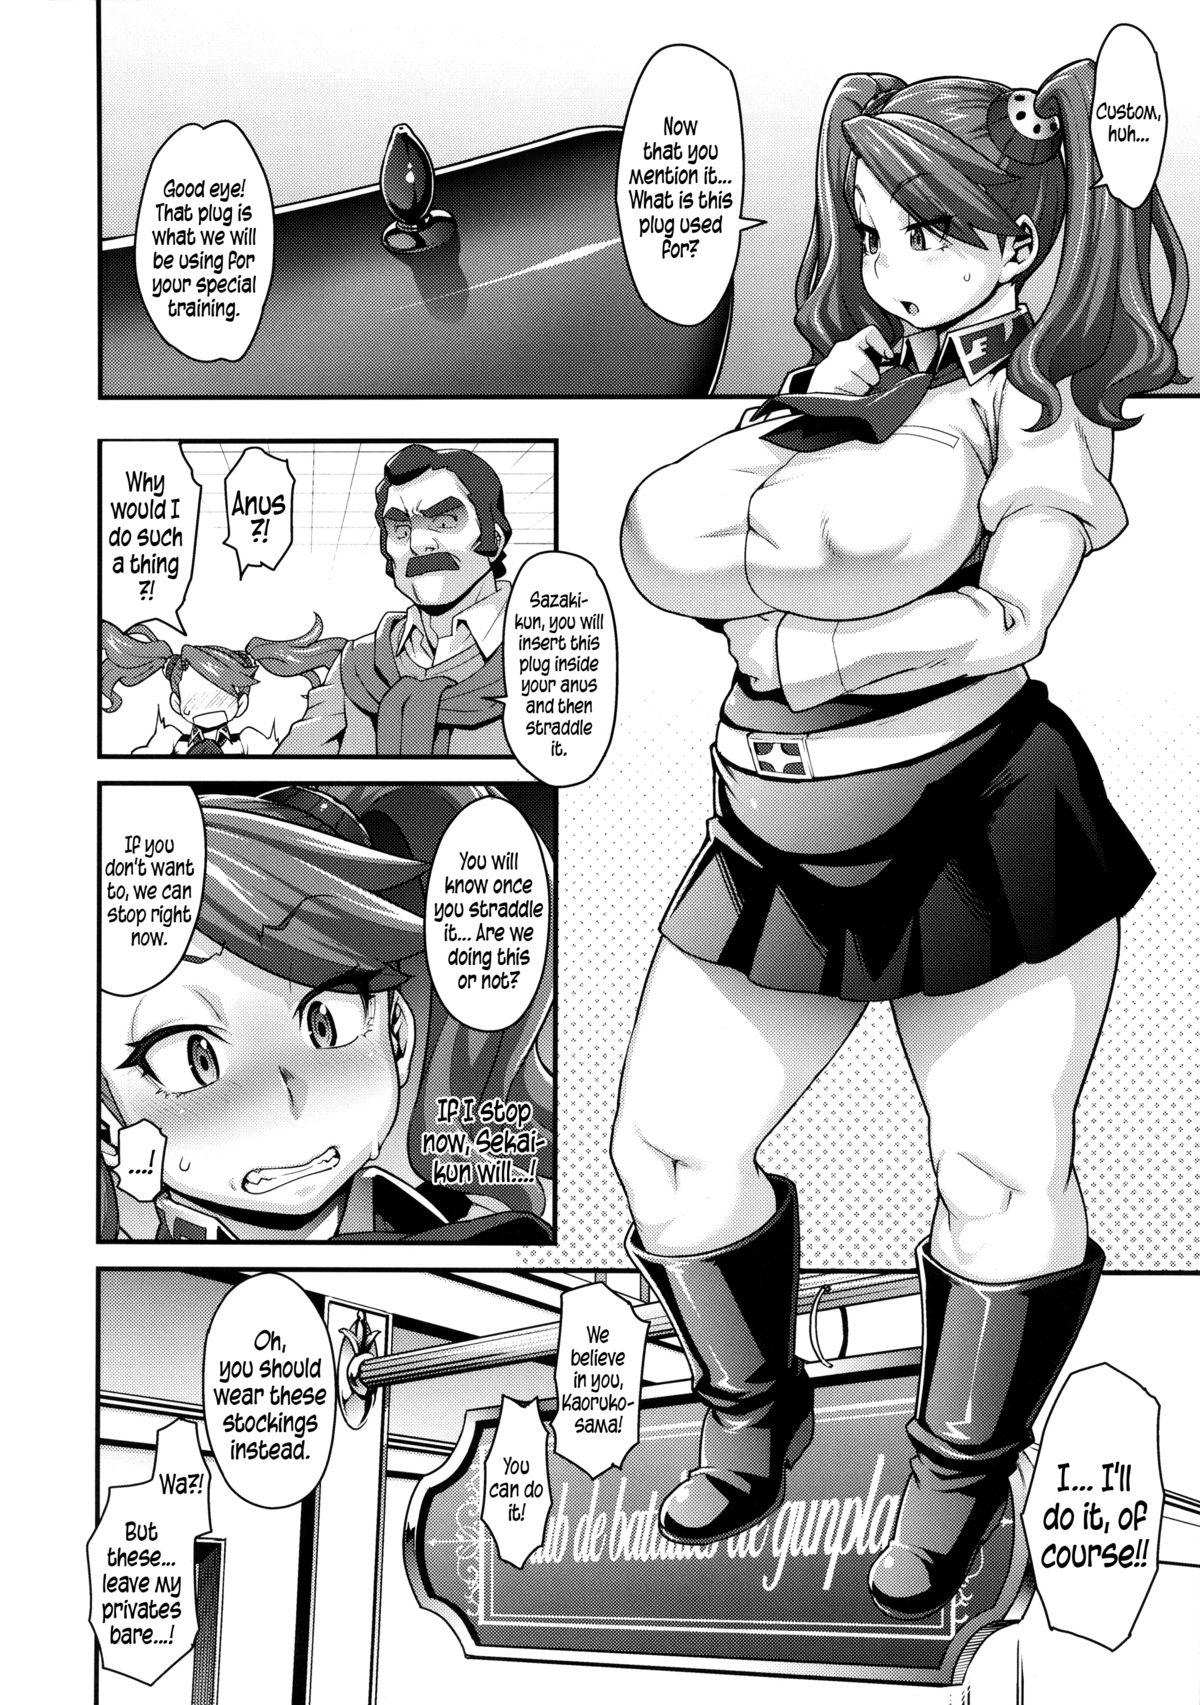 Sucking Cocks SHIRITSUBO | ASSVASE - Gundam build fighters try Super Hot Porn - Page 6